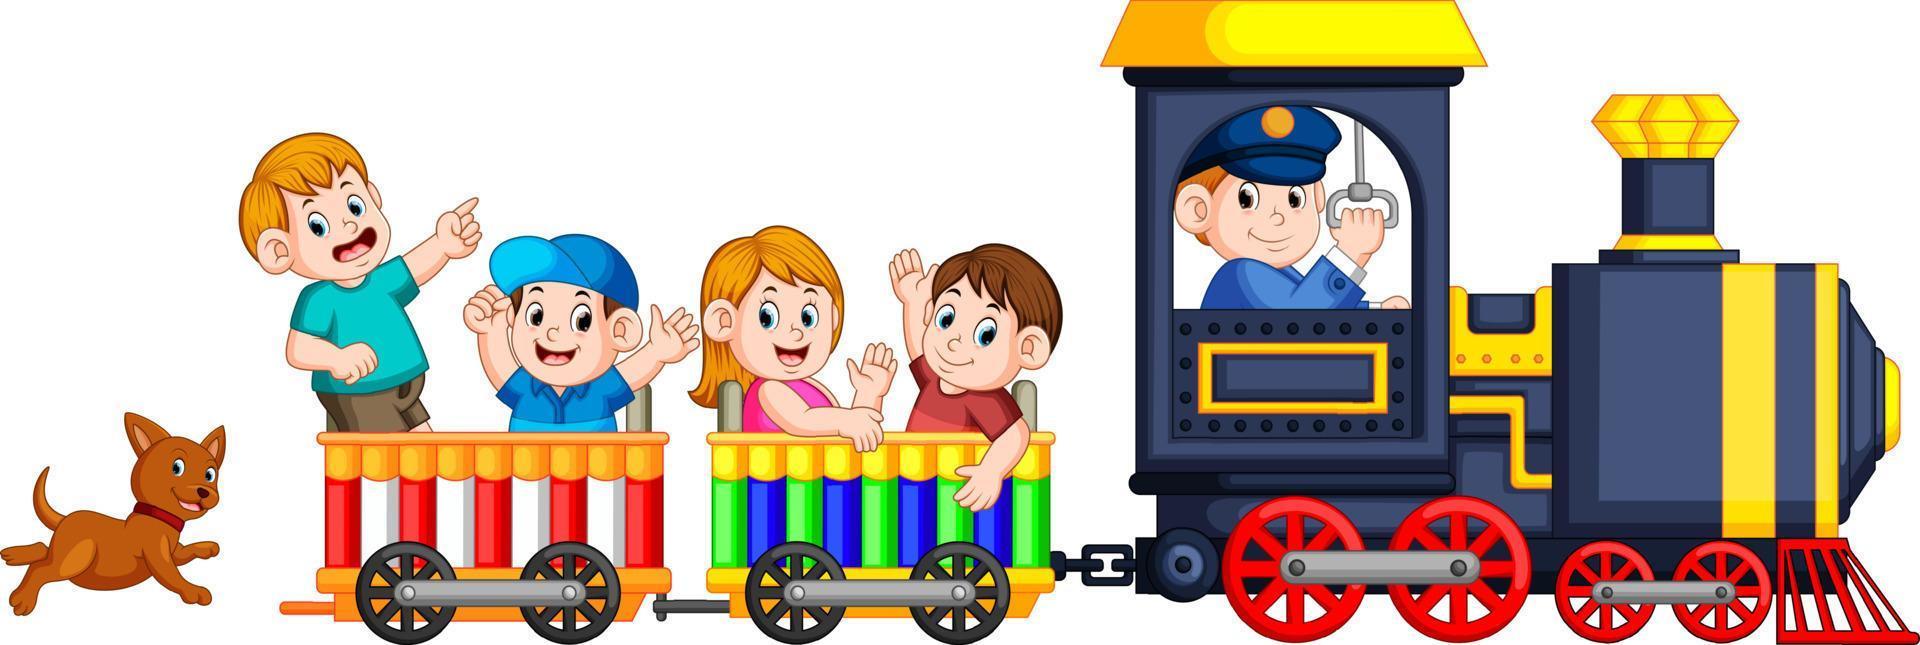 the children and engineer of locomotive get into the train and the dog follow them at the back vector